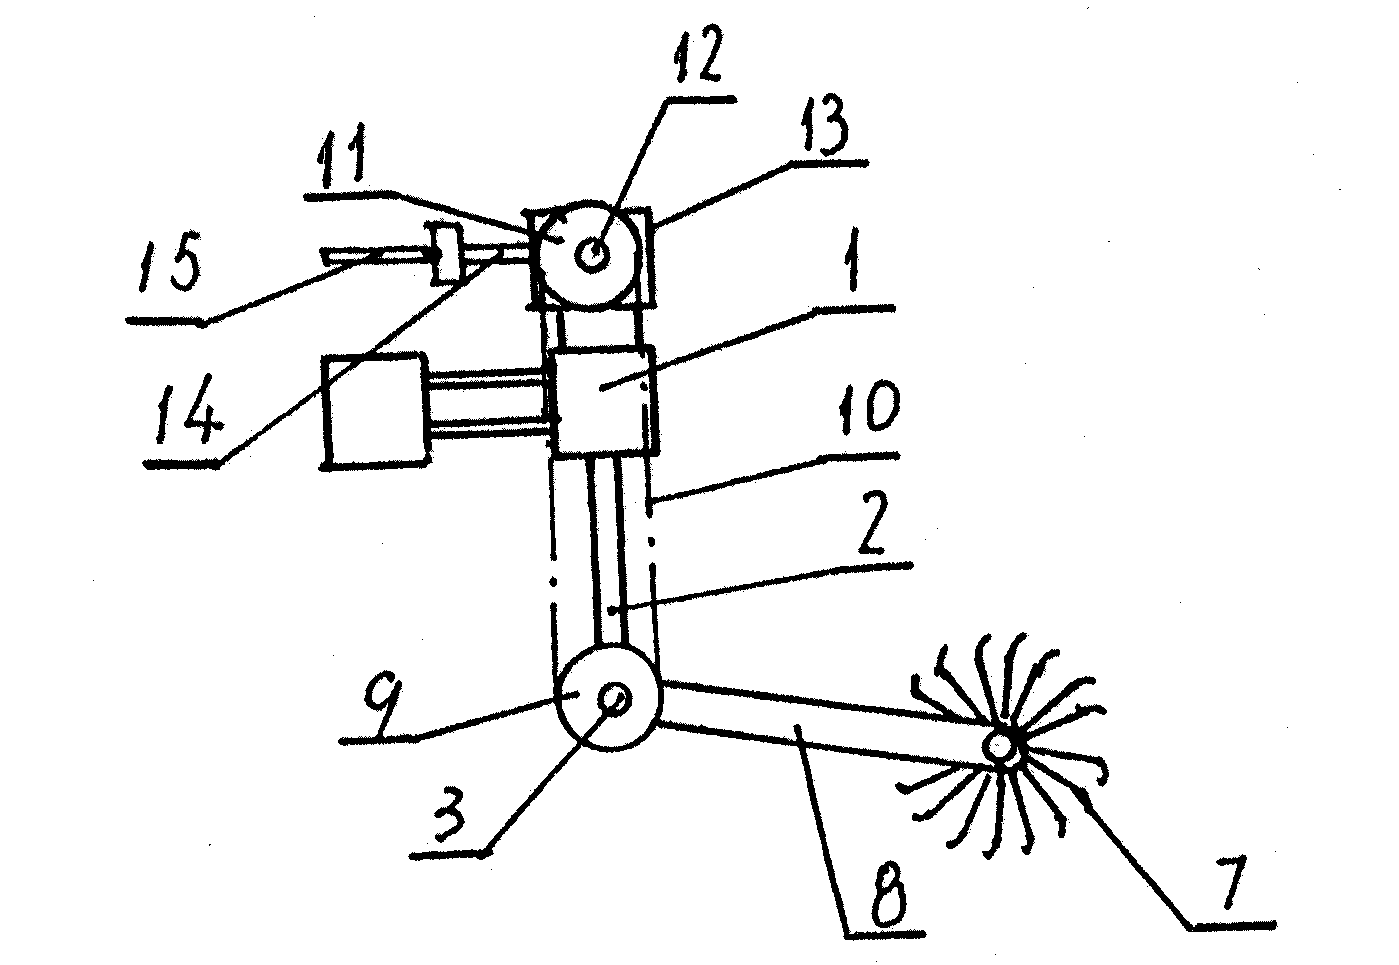 Extirpator capable of using tractor to output power to drive weeding tooth assembly to rotate